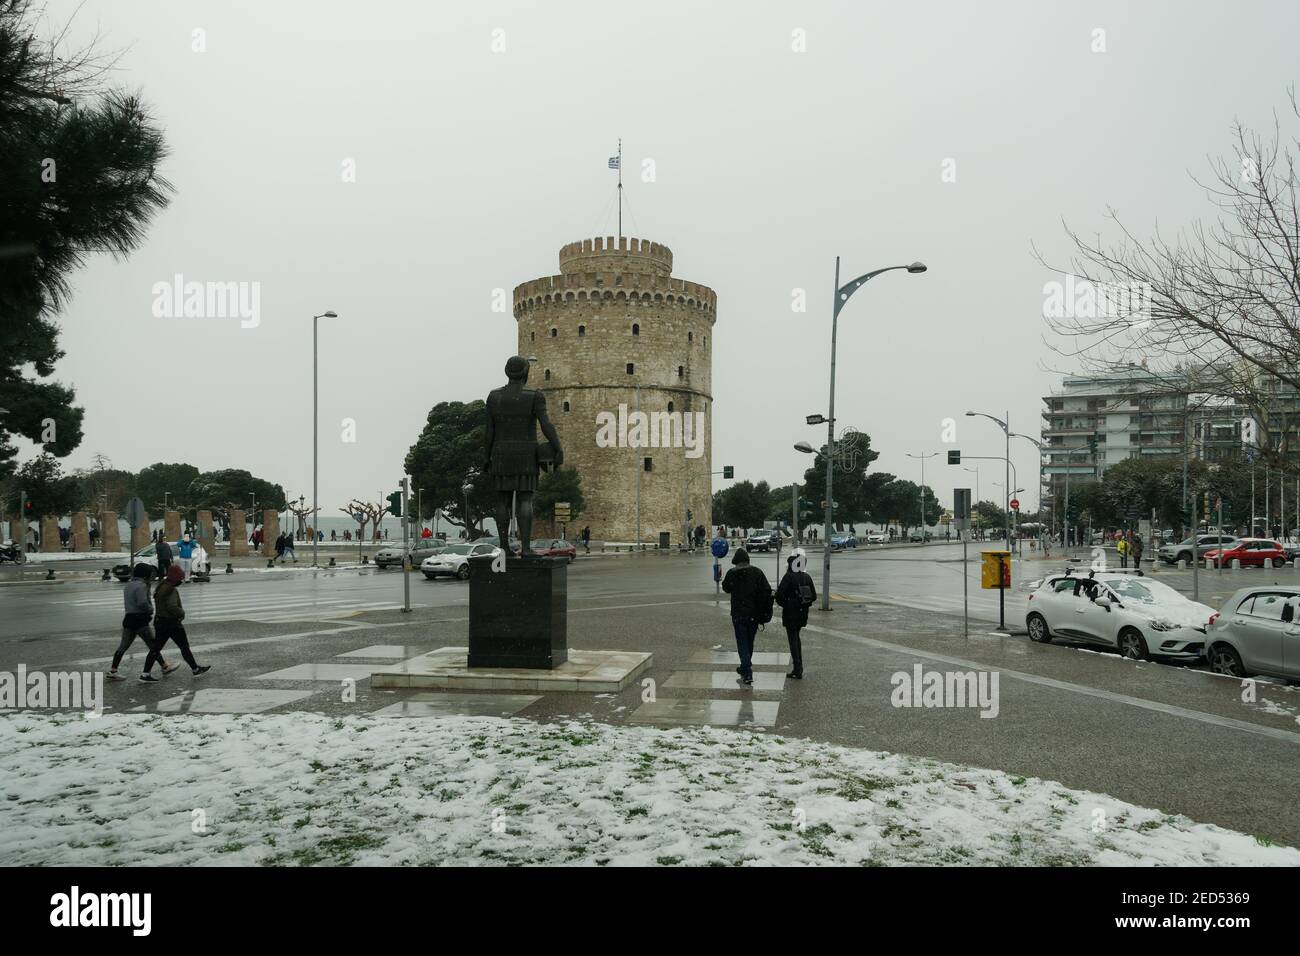 Thessaloniki, Greece - February 14 2021: Medea front hits with heavy  snowfall city center, with crowd moving. People in warm clothes and  covid-19 masks around White Tower landmark with snow falling Stock Photo -  Alamy